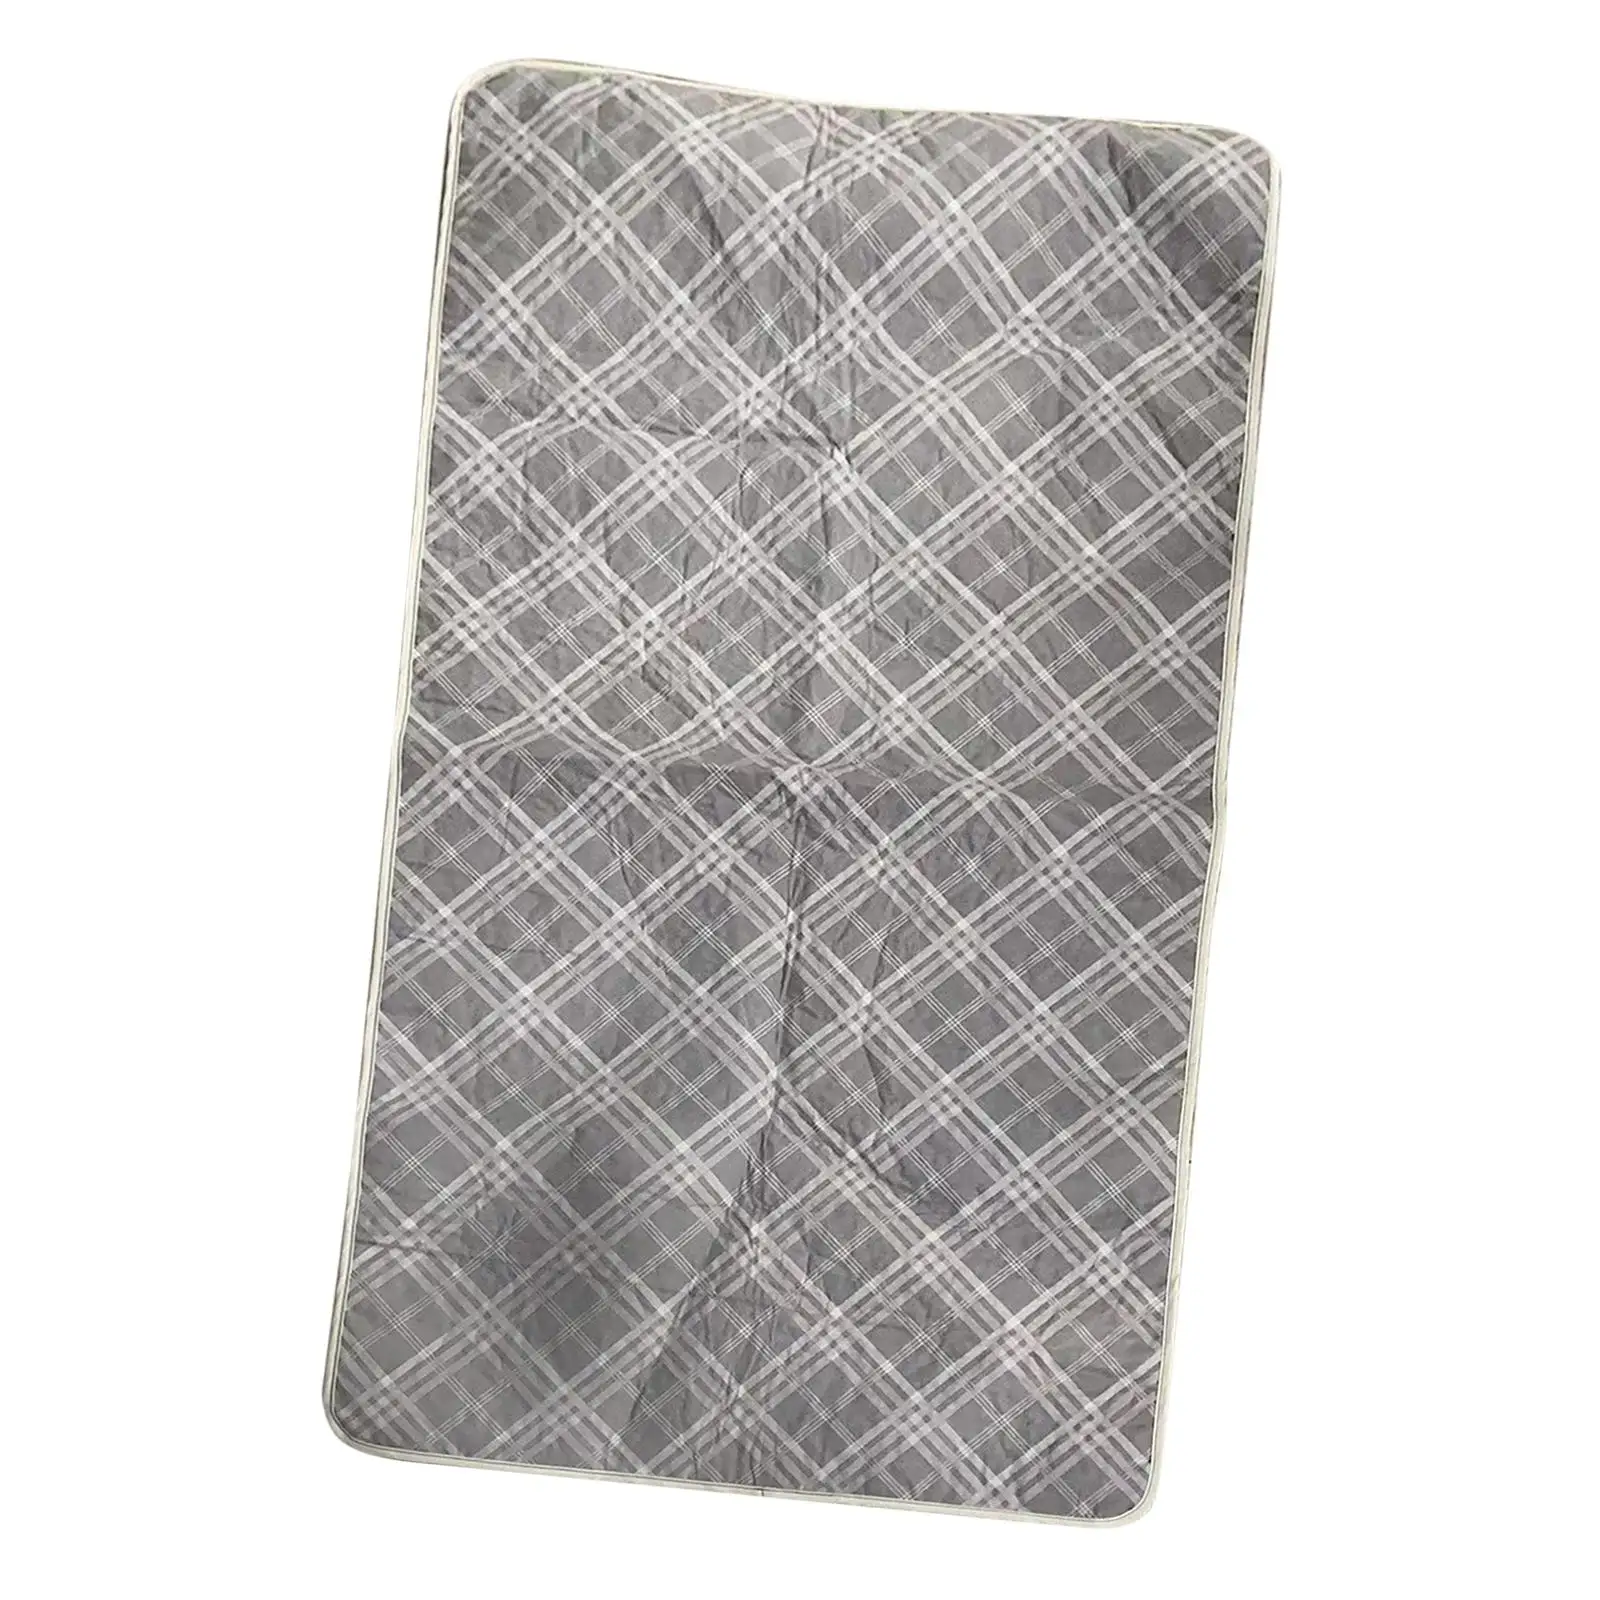 Pet Dog Pee Pad Mat Puppy Absorbent Pad Reusable Washable Cushion Blanket Bed for Crate Playpen Kennel Cage Supplies Home Travel